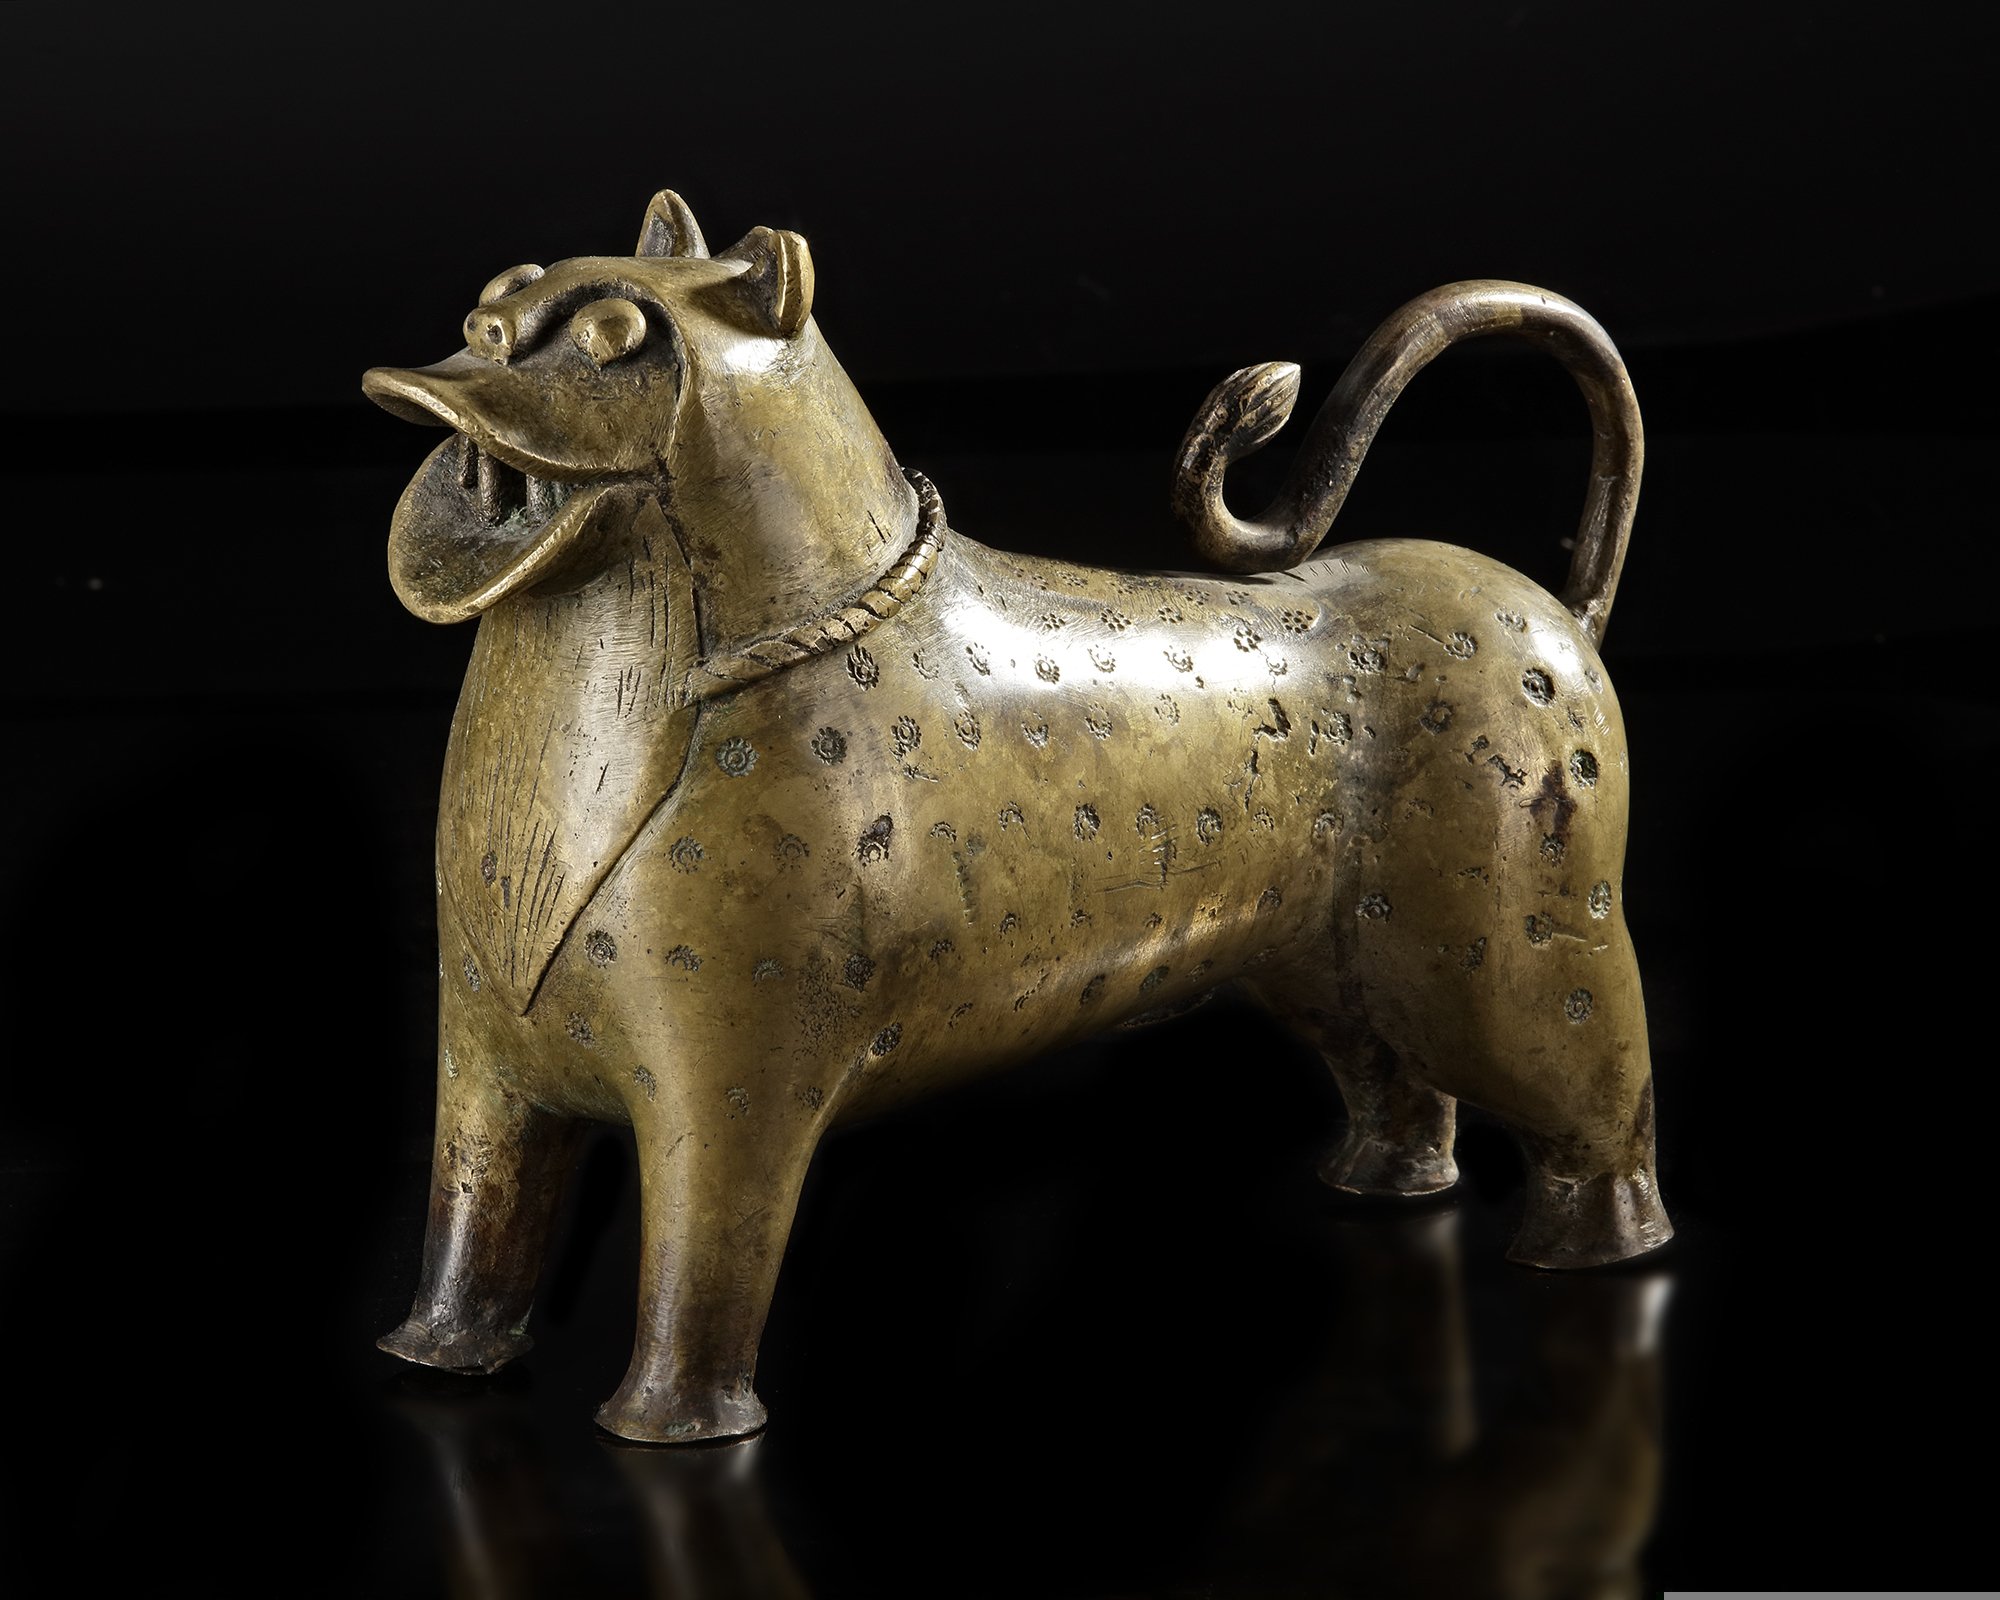 A MUGHAL BRASS INCENSE BURNER IN THE FORM OF A LION, INDIA, 17TH CENTURY - Image 2 of 4